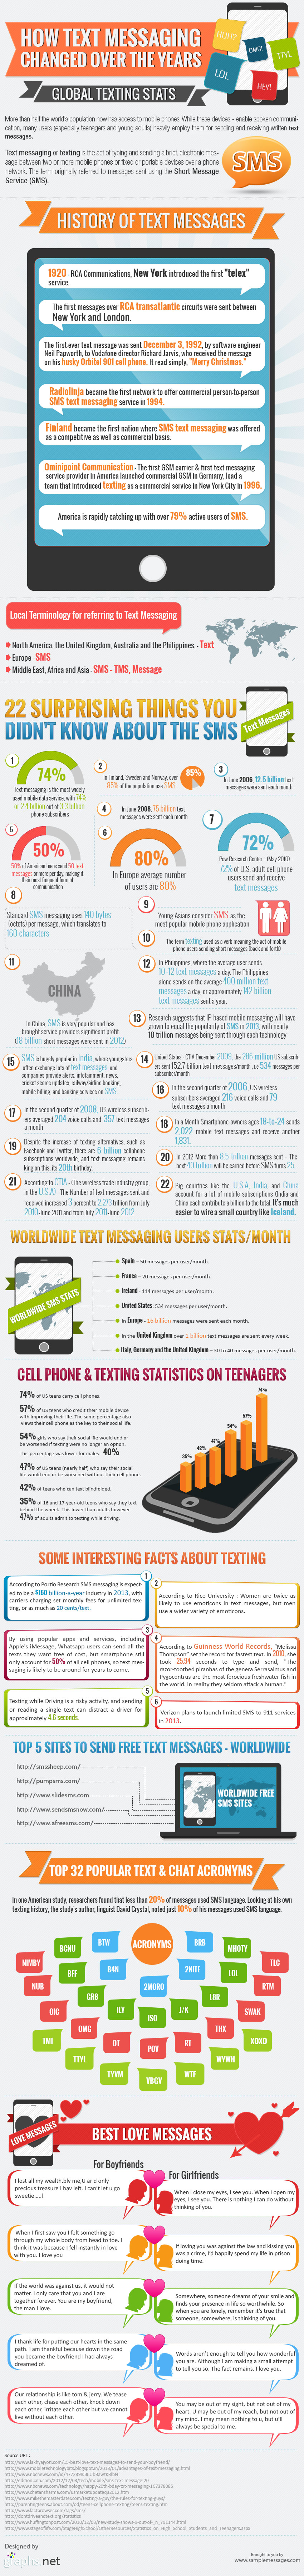 How text messaging has changed the communication world